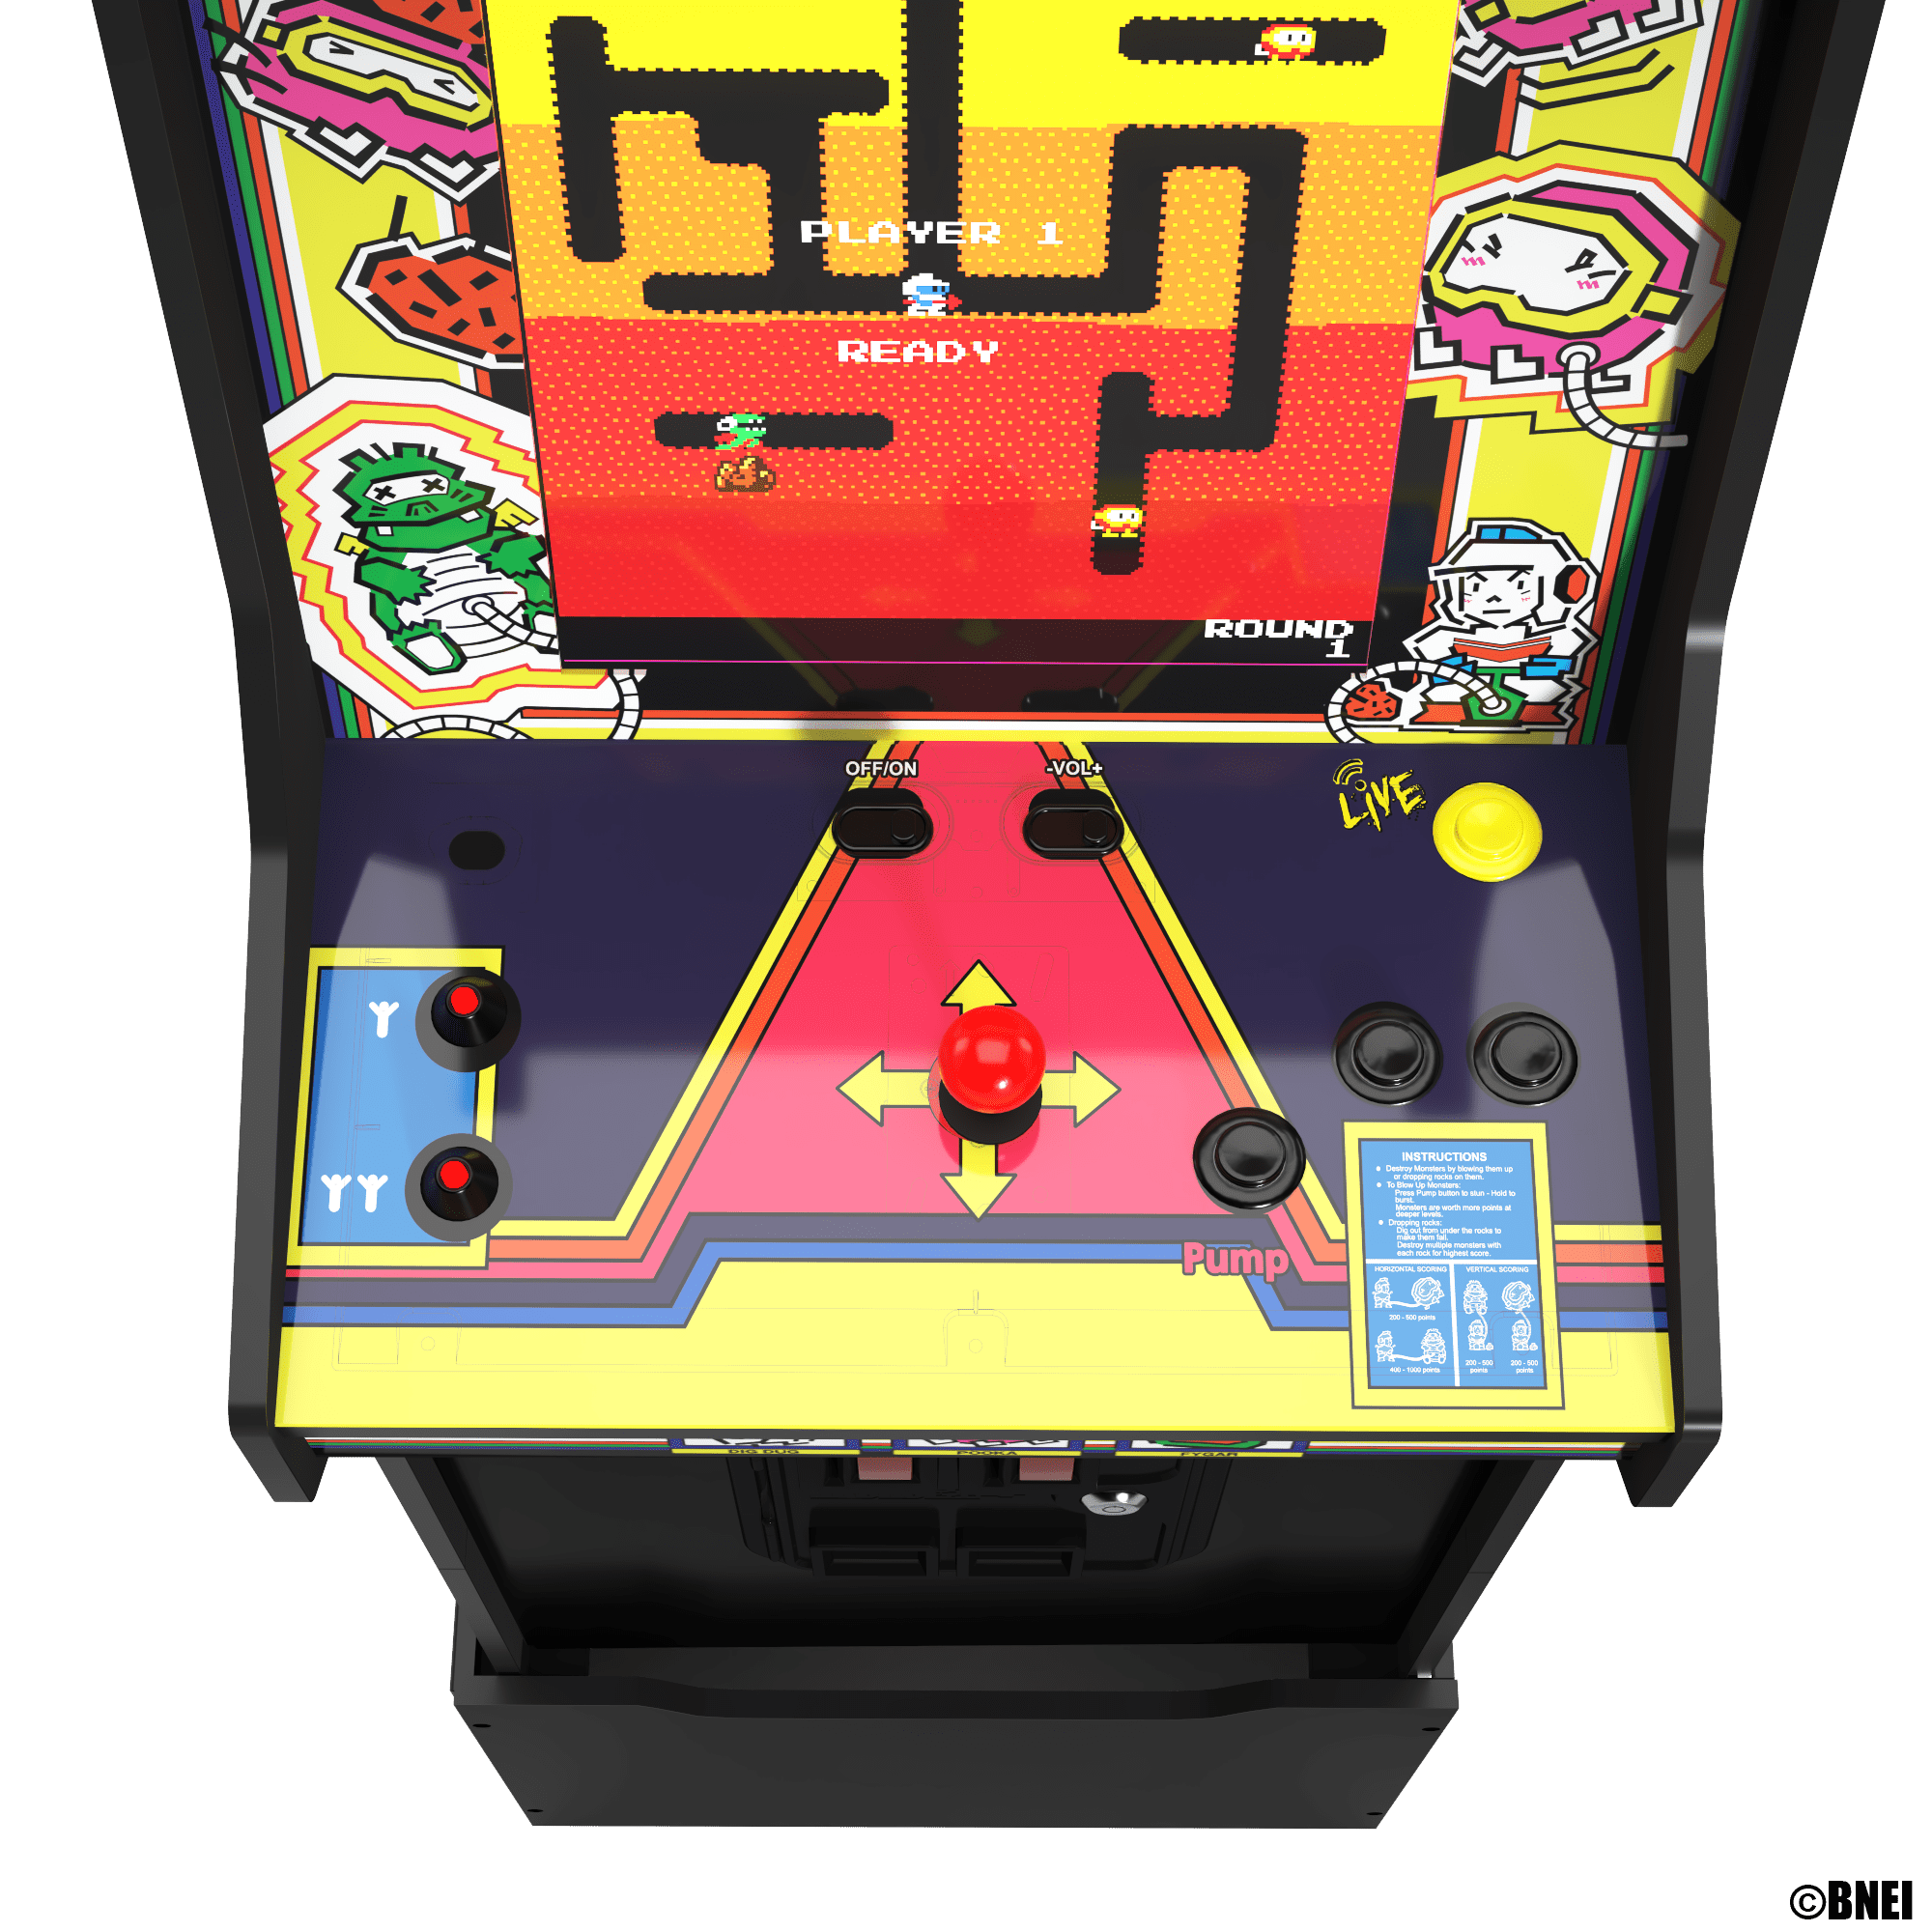 Arcade 1up: Unleashing Nostalgia with Authentic Video Game